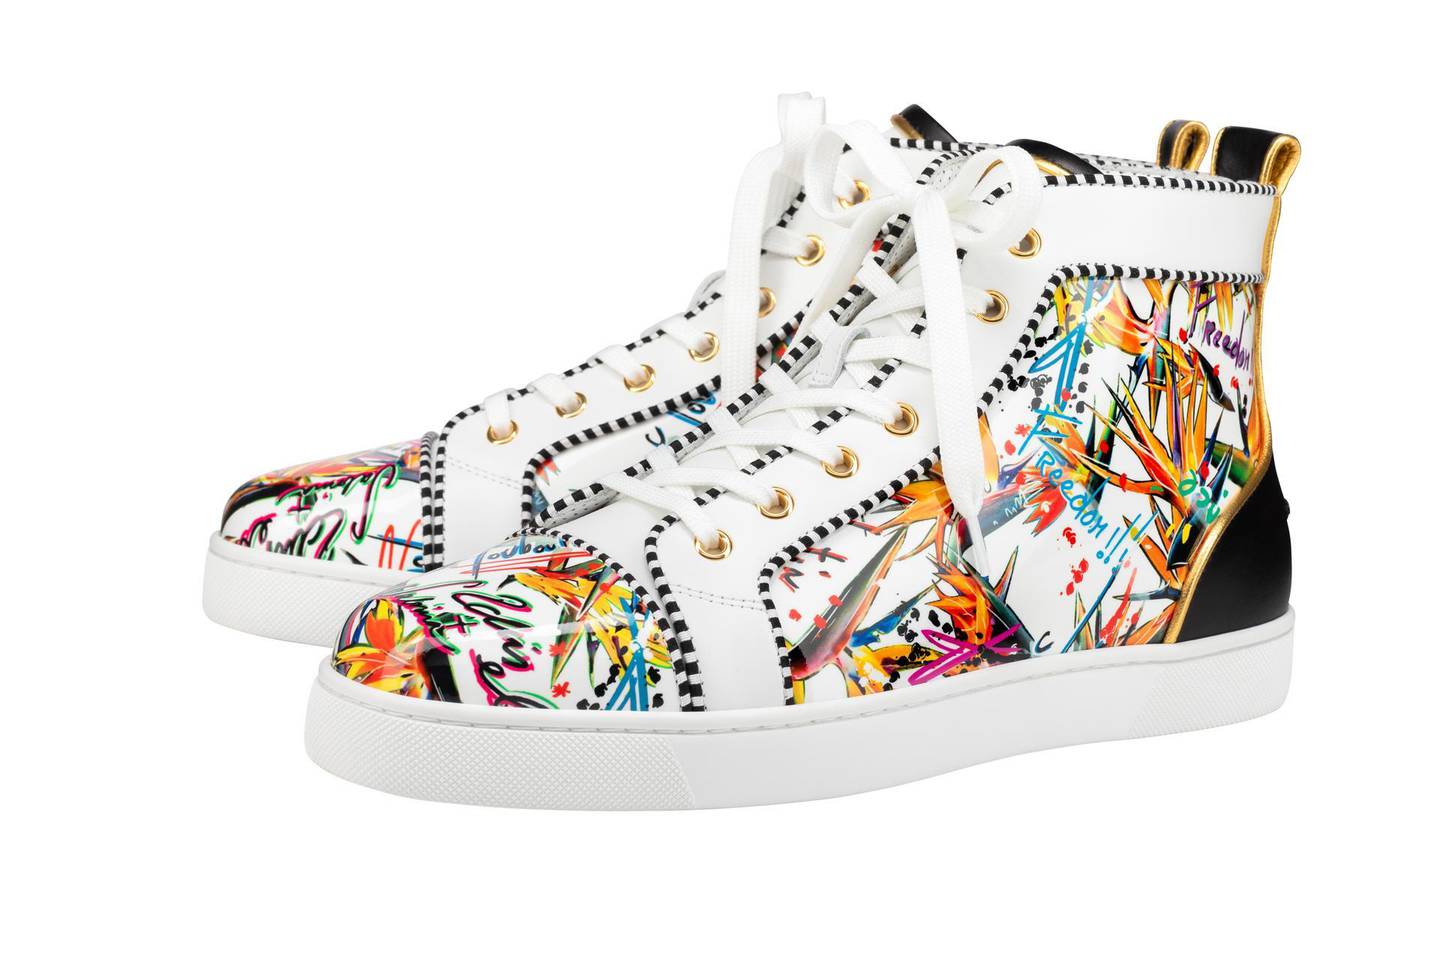 The colourful pattern is based on the 'Mandela's Gold' flower from South Africa. Courtesy Christian Louboutin